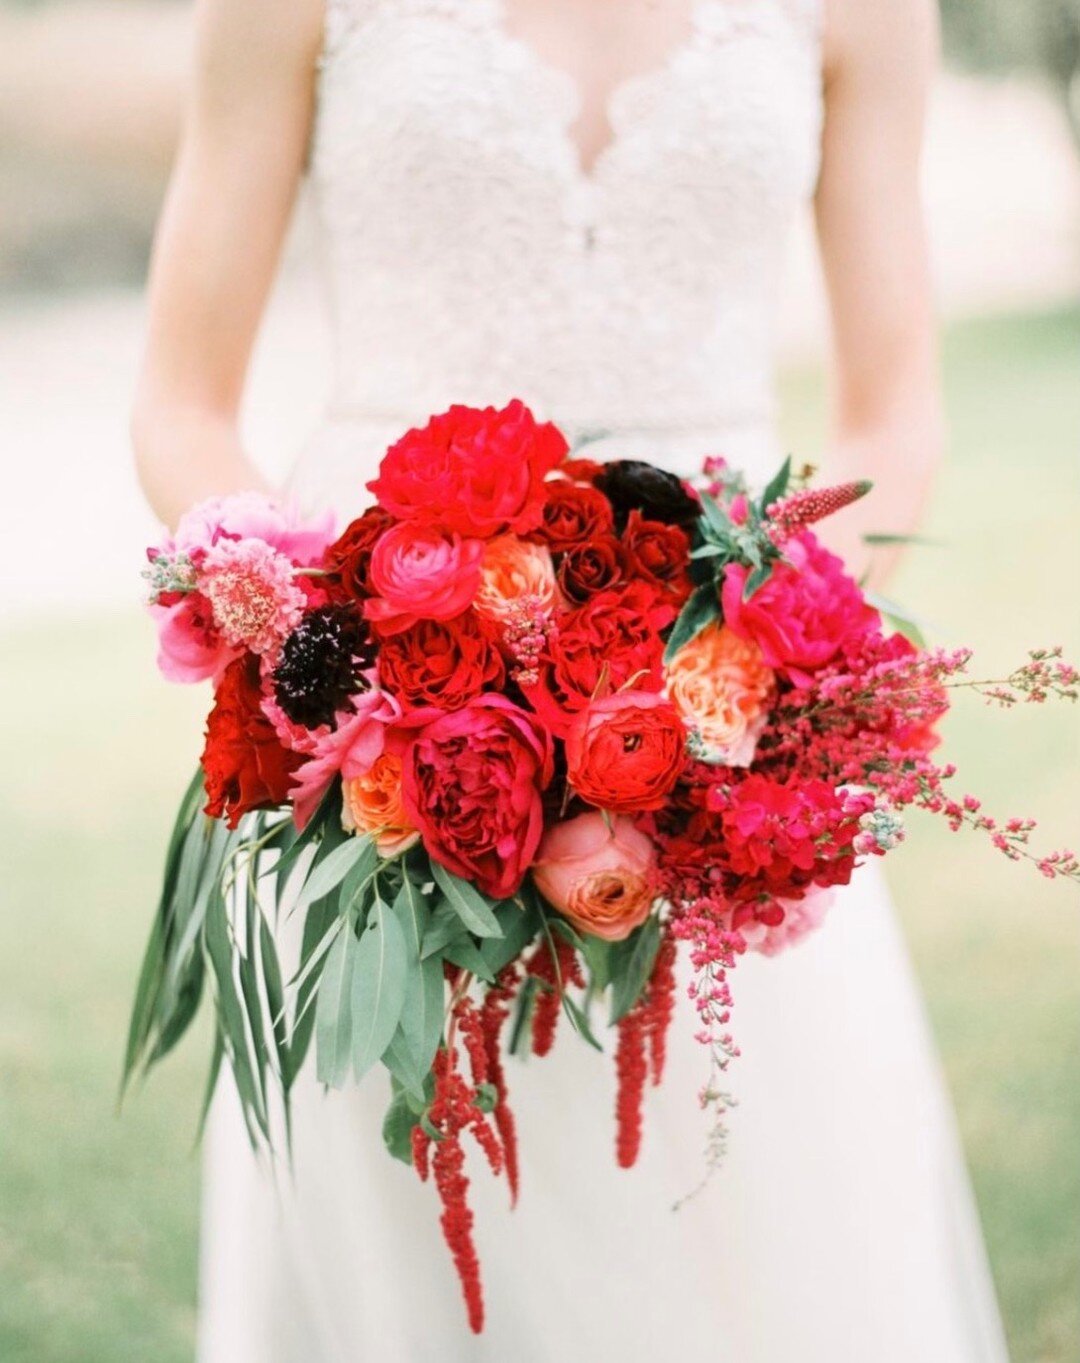 Color is meant to be used in flowers, in life and in love! ❤️

.
.
.

#florist #bride #austinwedding #thepetalpushers #weddingwire 
#austinflorist #hillcountry #weddingflorals
#hillcountrywedding #hillcountryweddings
#weddinginspo #weddinginspiration